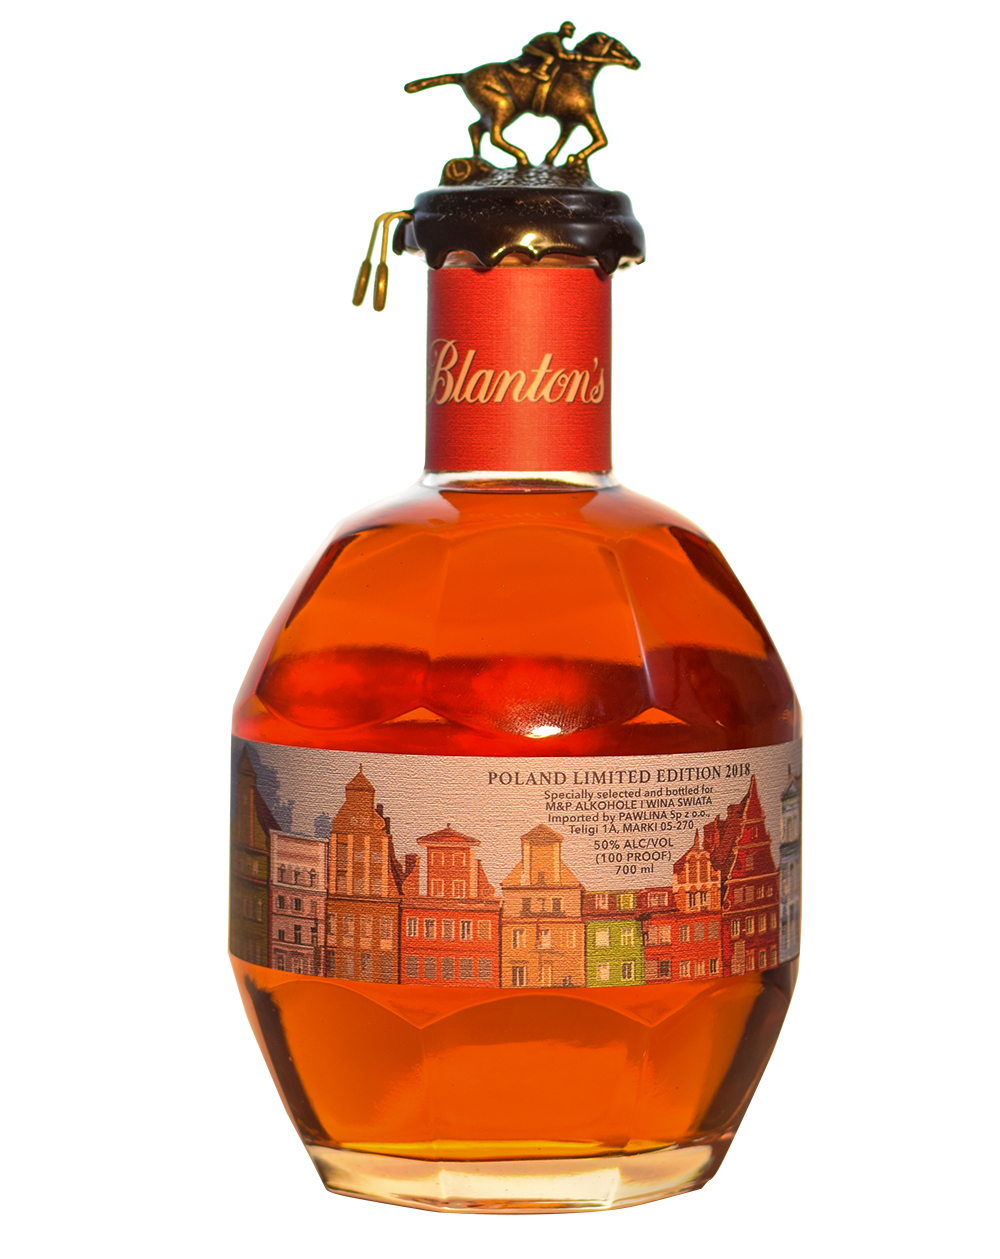 Blanton's Poland Limited Edition 2018 Musthave Malts MHM